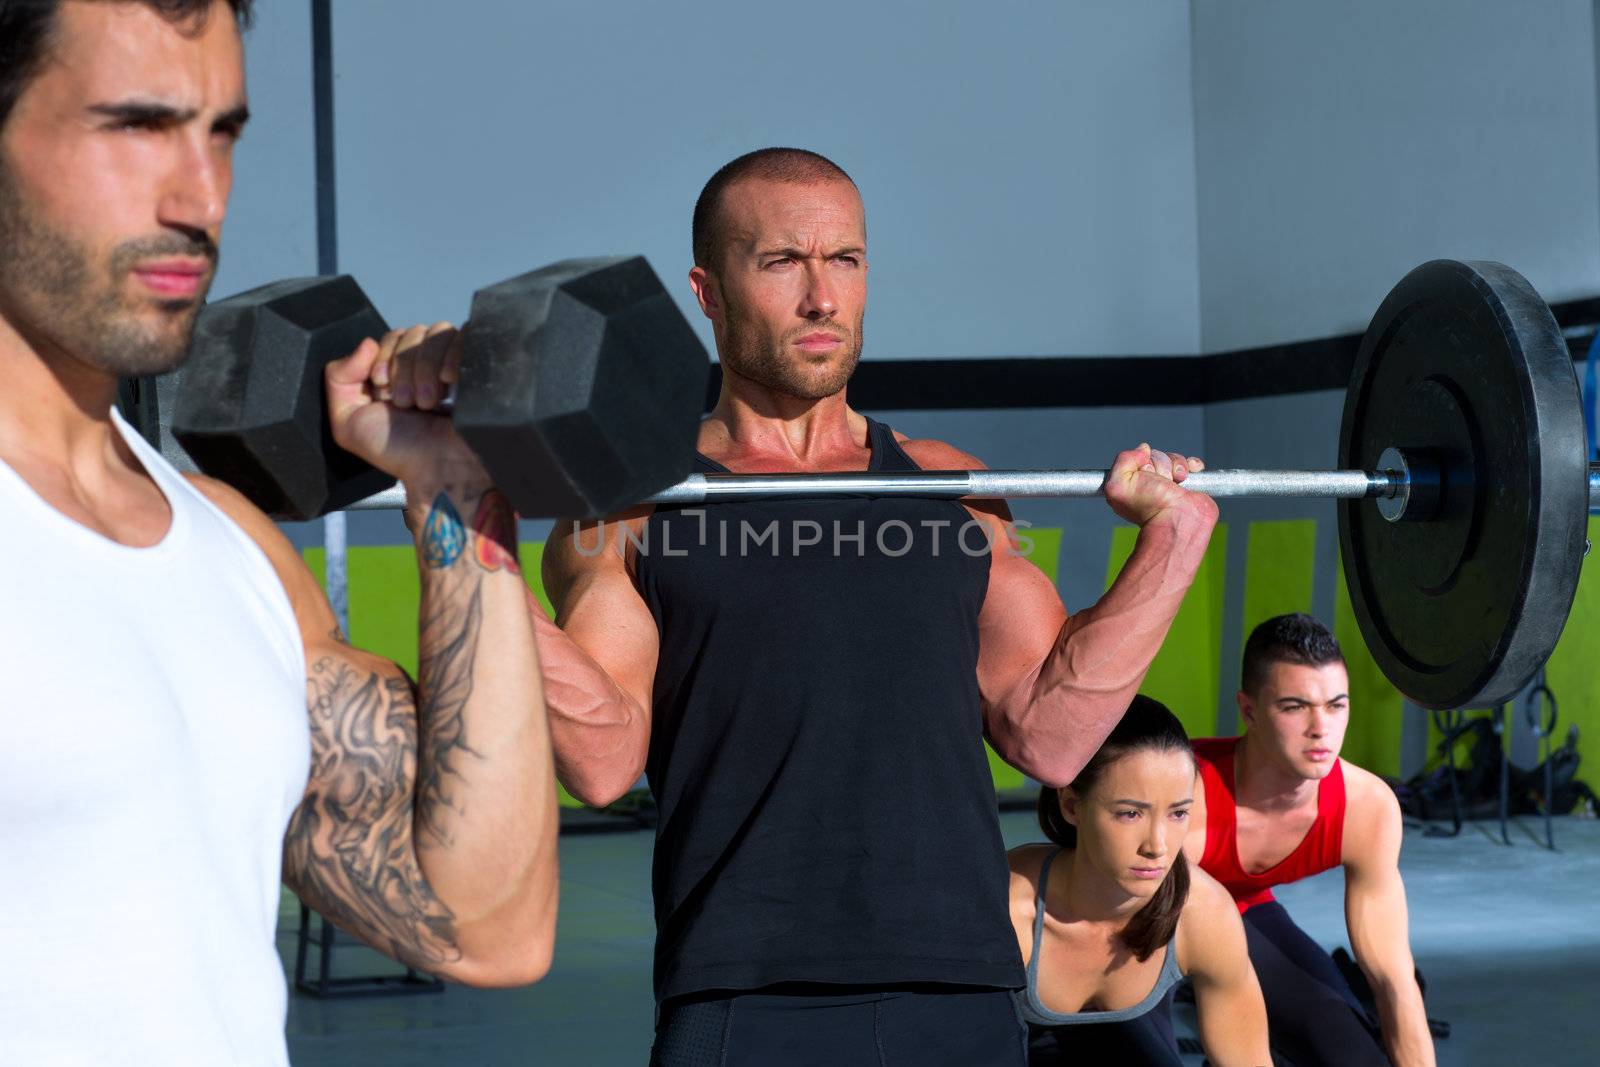 gym group with weight lifting bar and dumbbells workout in crossfit exercise